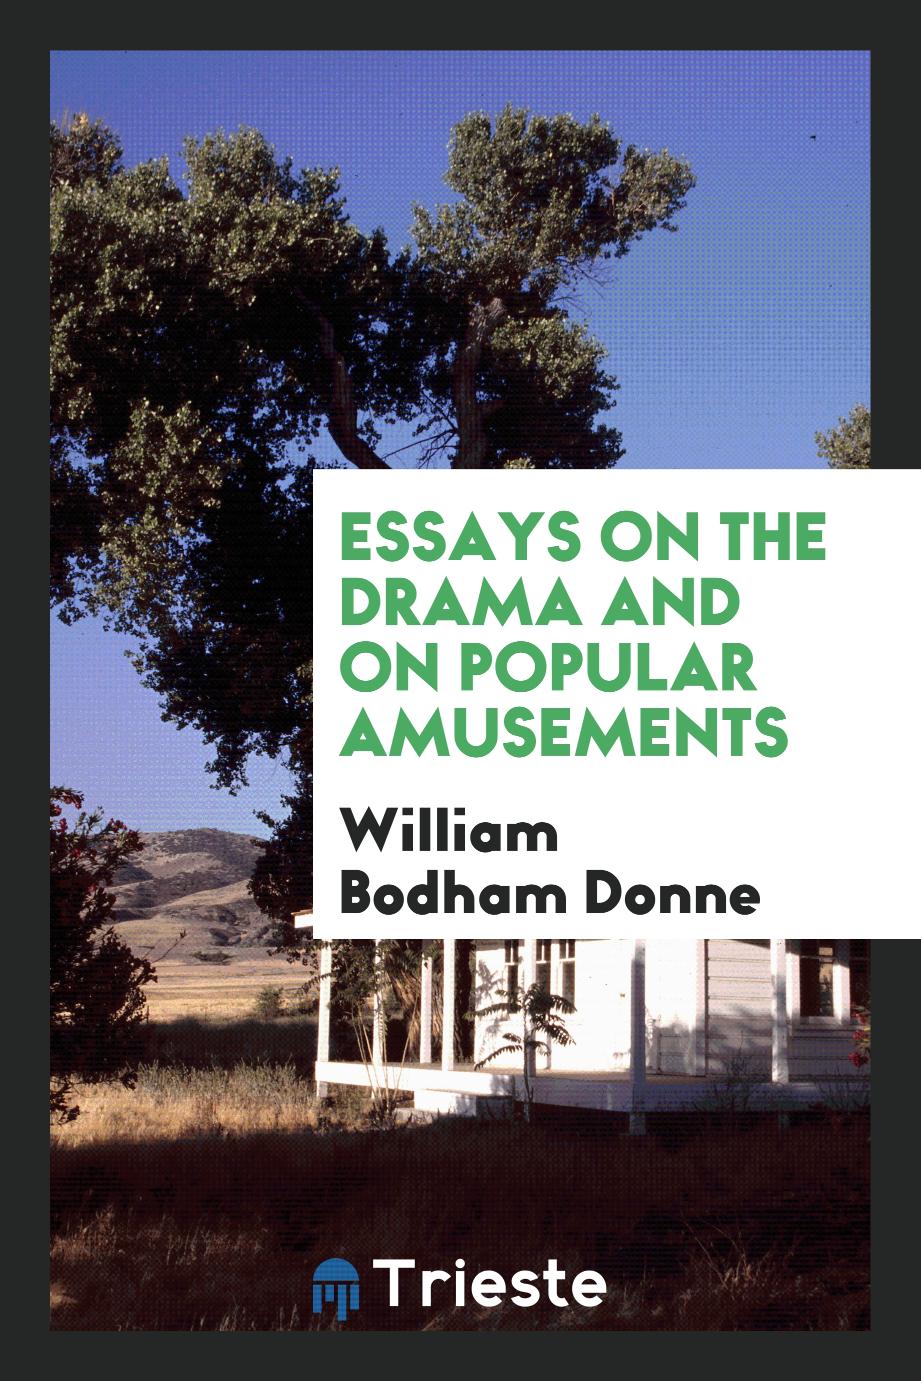 Essays on the drama and on popular amusements